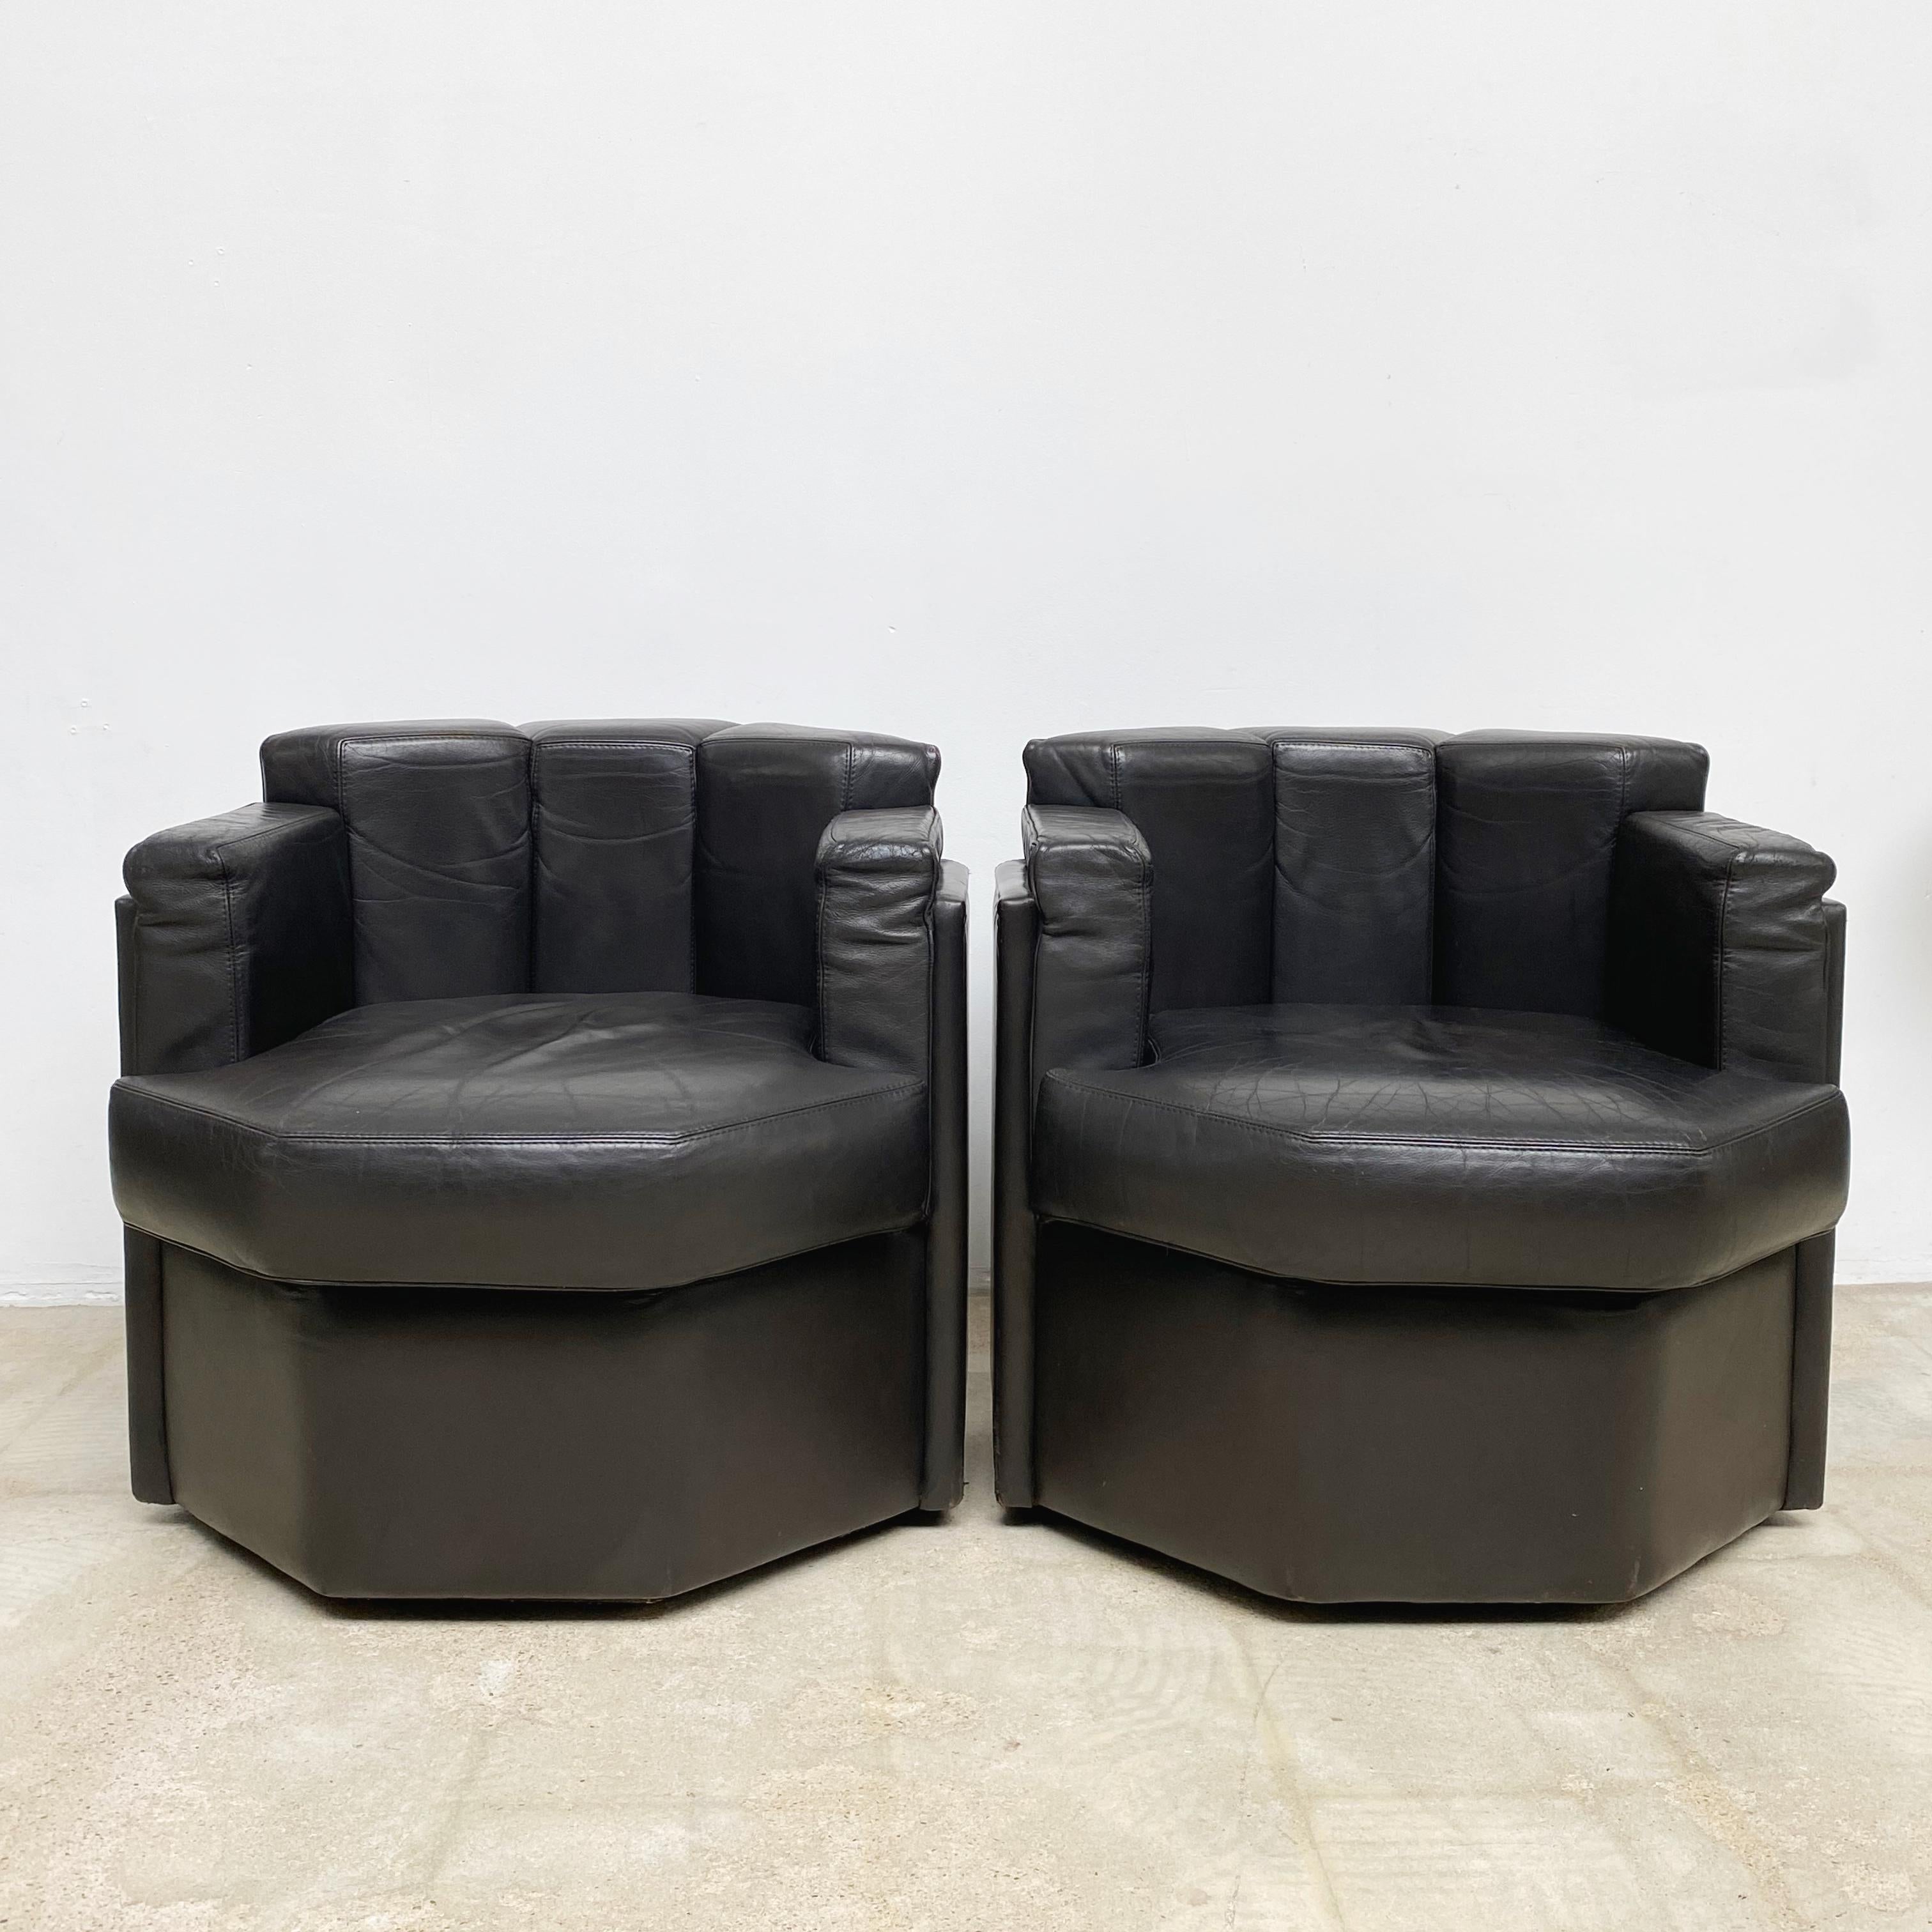 Set of Brown Leather Octagonal Club Chairs, 1970s For Sale 1